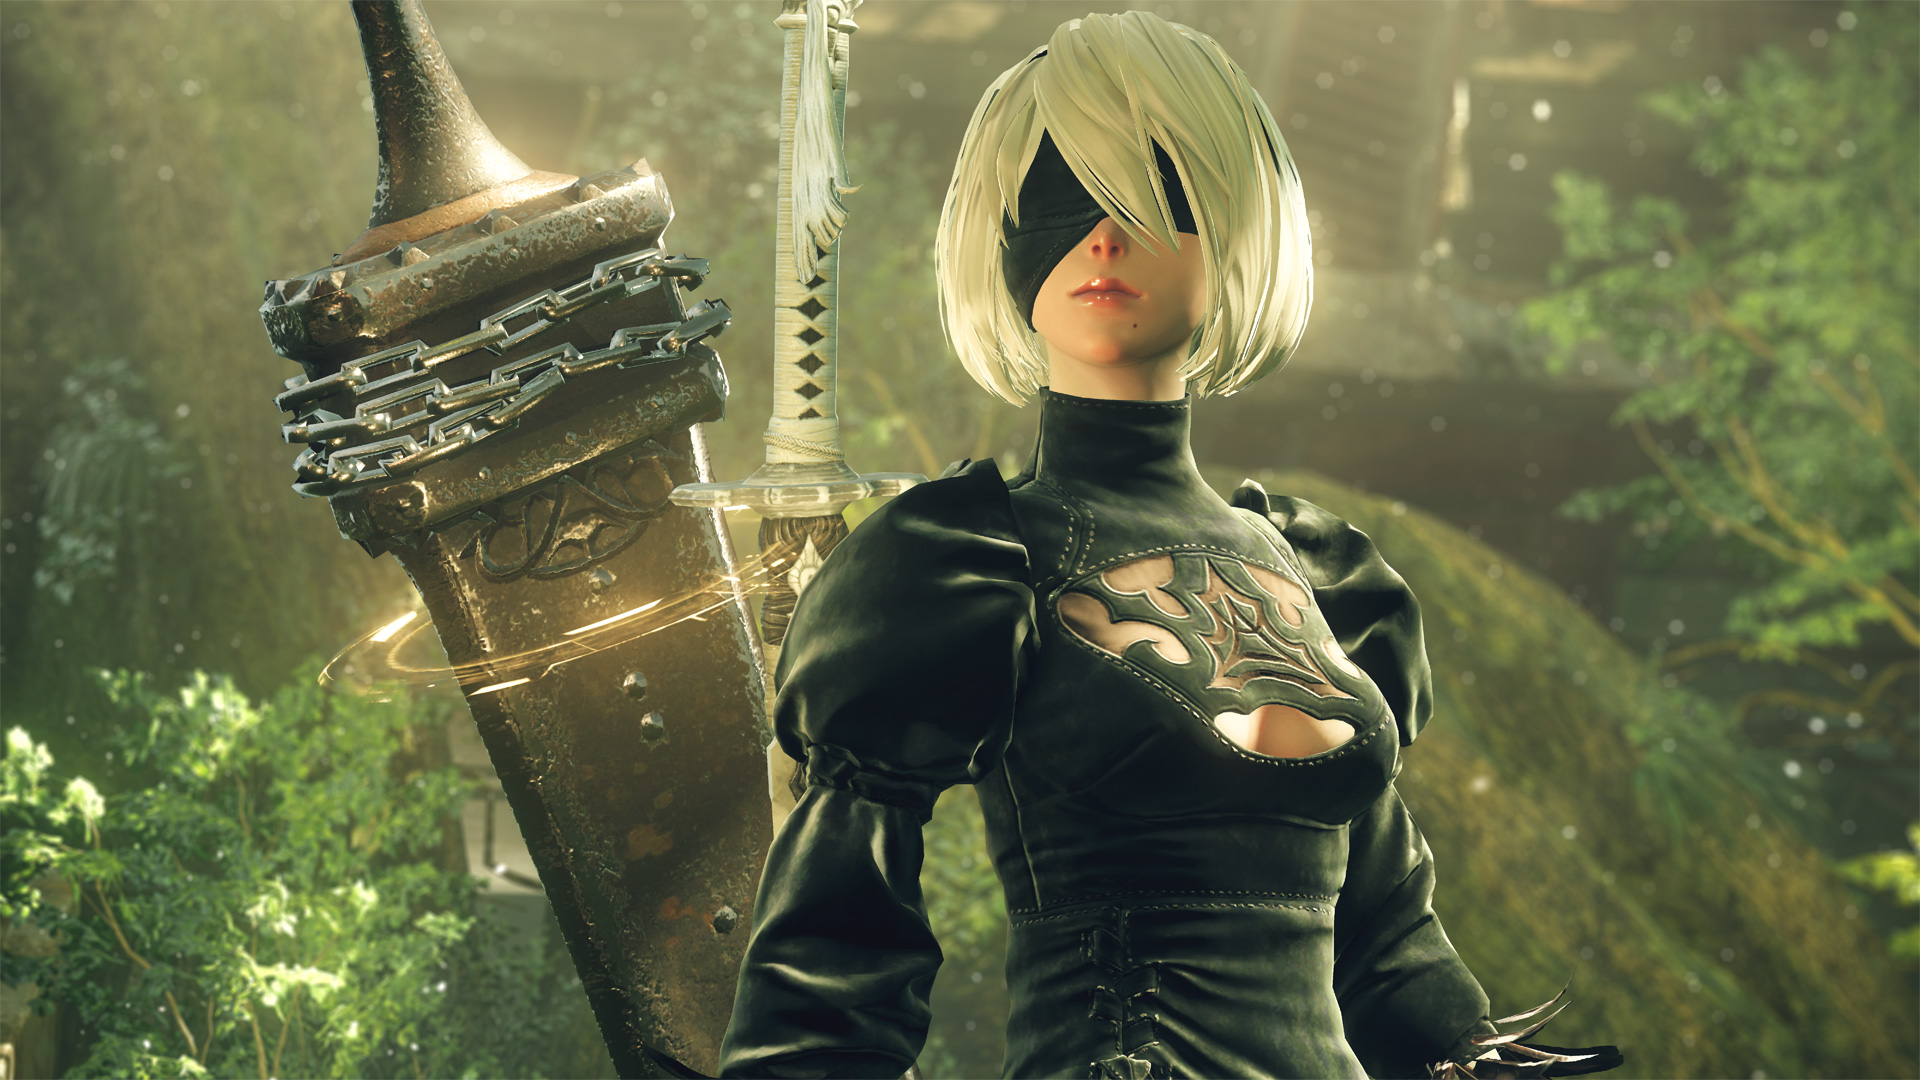 Nier Automata On Game Pass Windows Store Is A Different Port To The Steam Version Doesn T Need The Fan Fix Pc Gamer